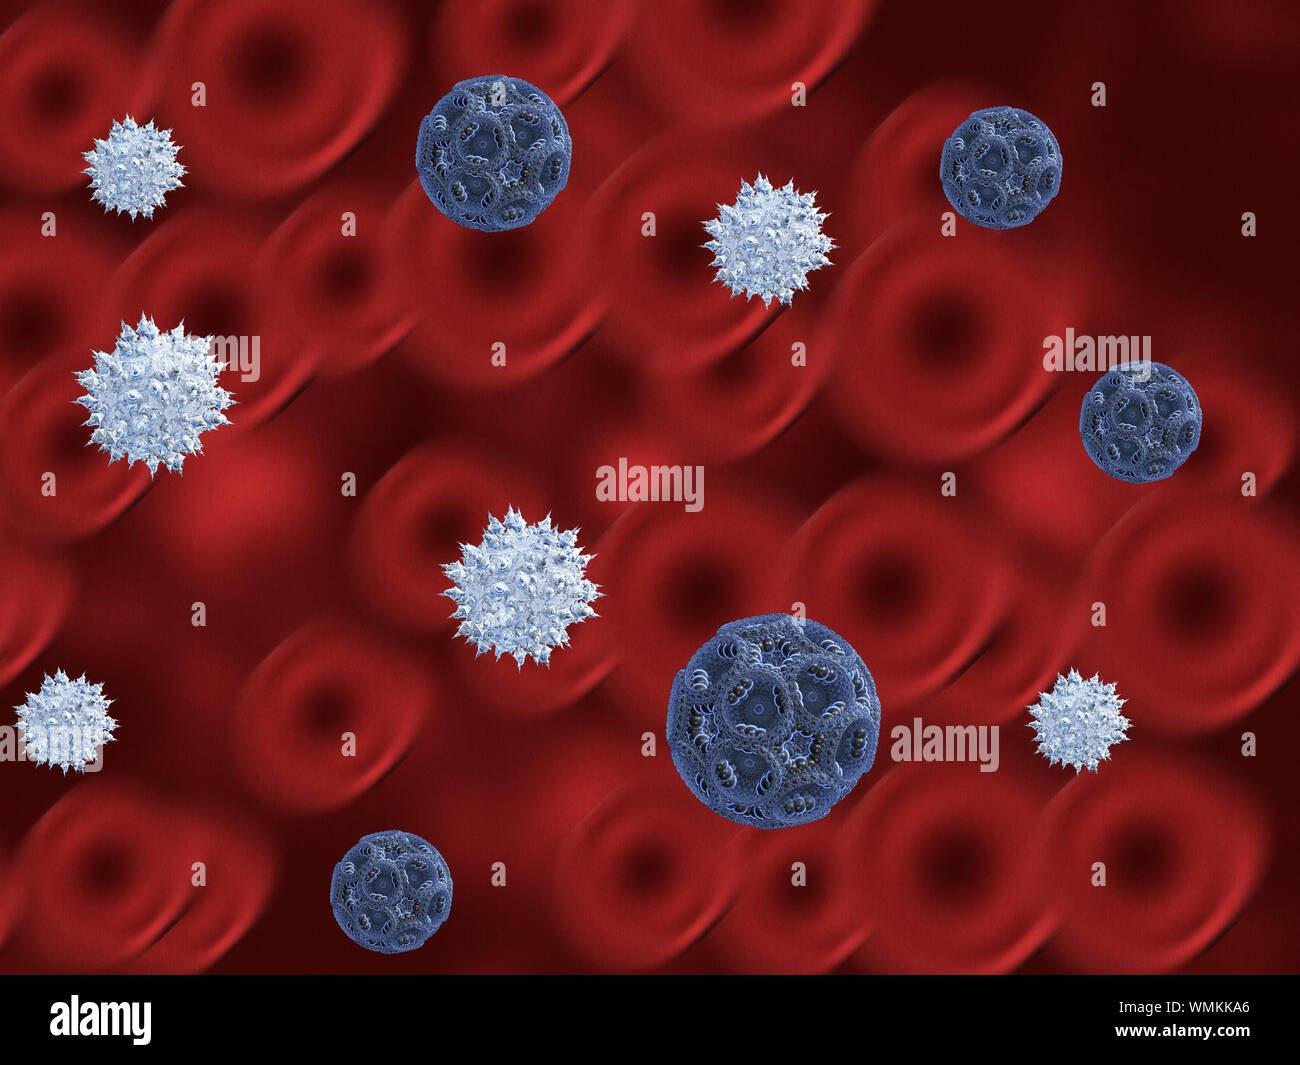 Abstract illustration of blue virus cells and red blood cells background. Stock Photo